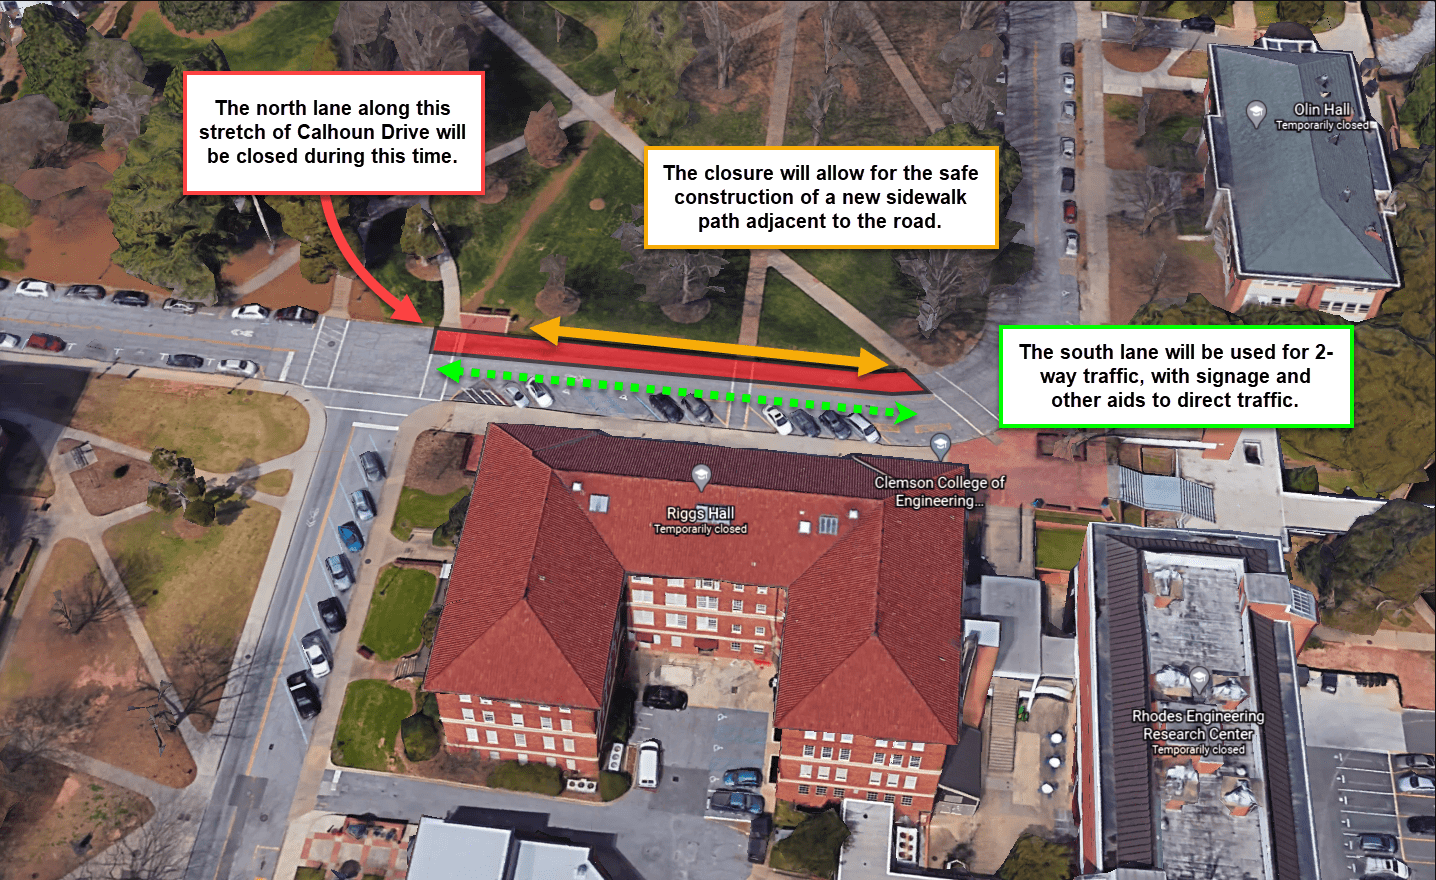 The north lane of Calhoun Drive will be closed for construction of a sidewalk.